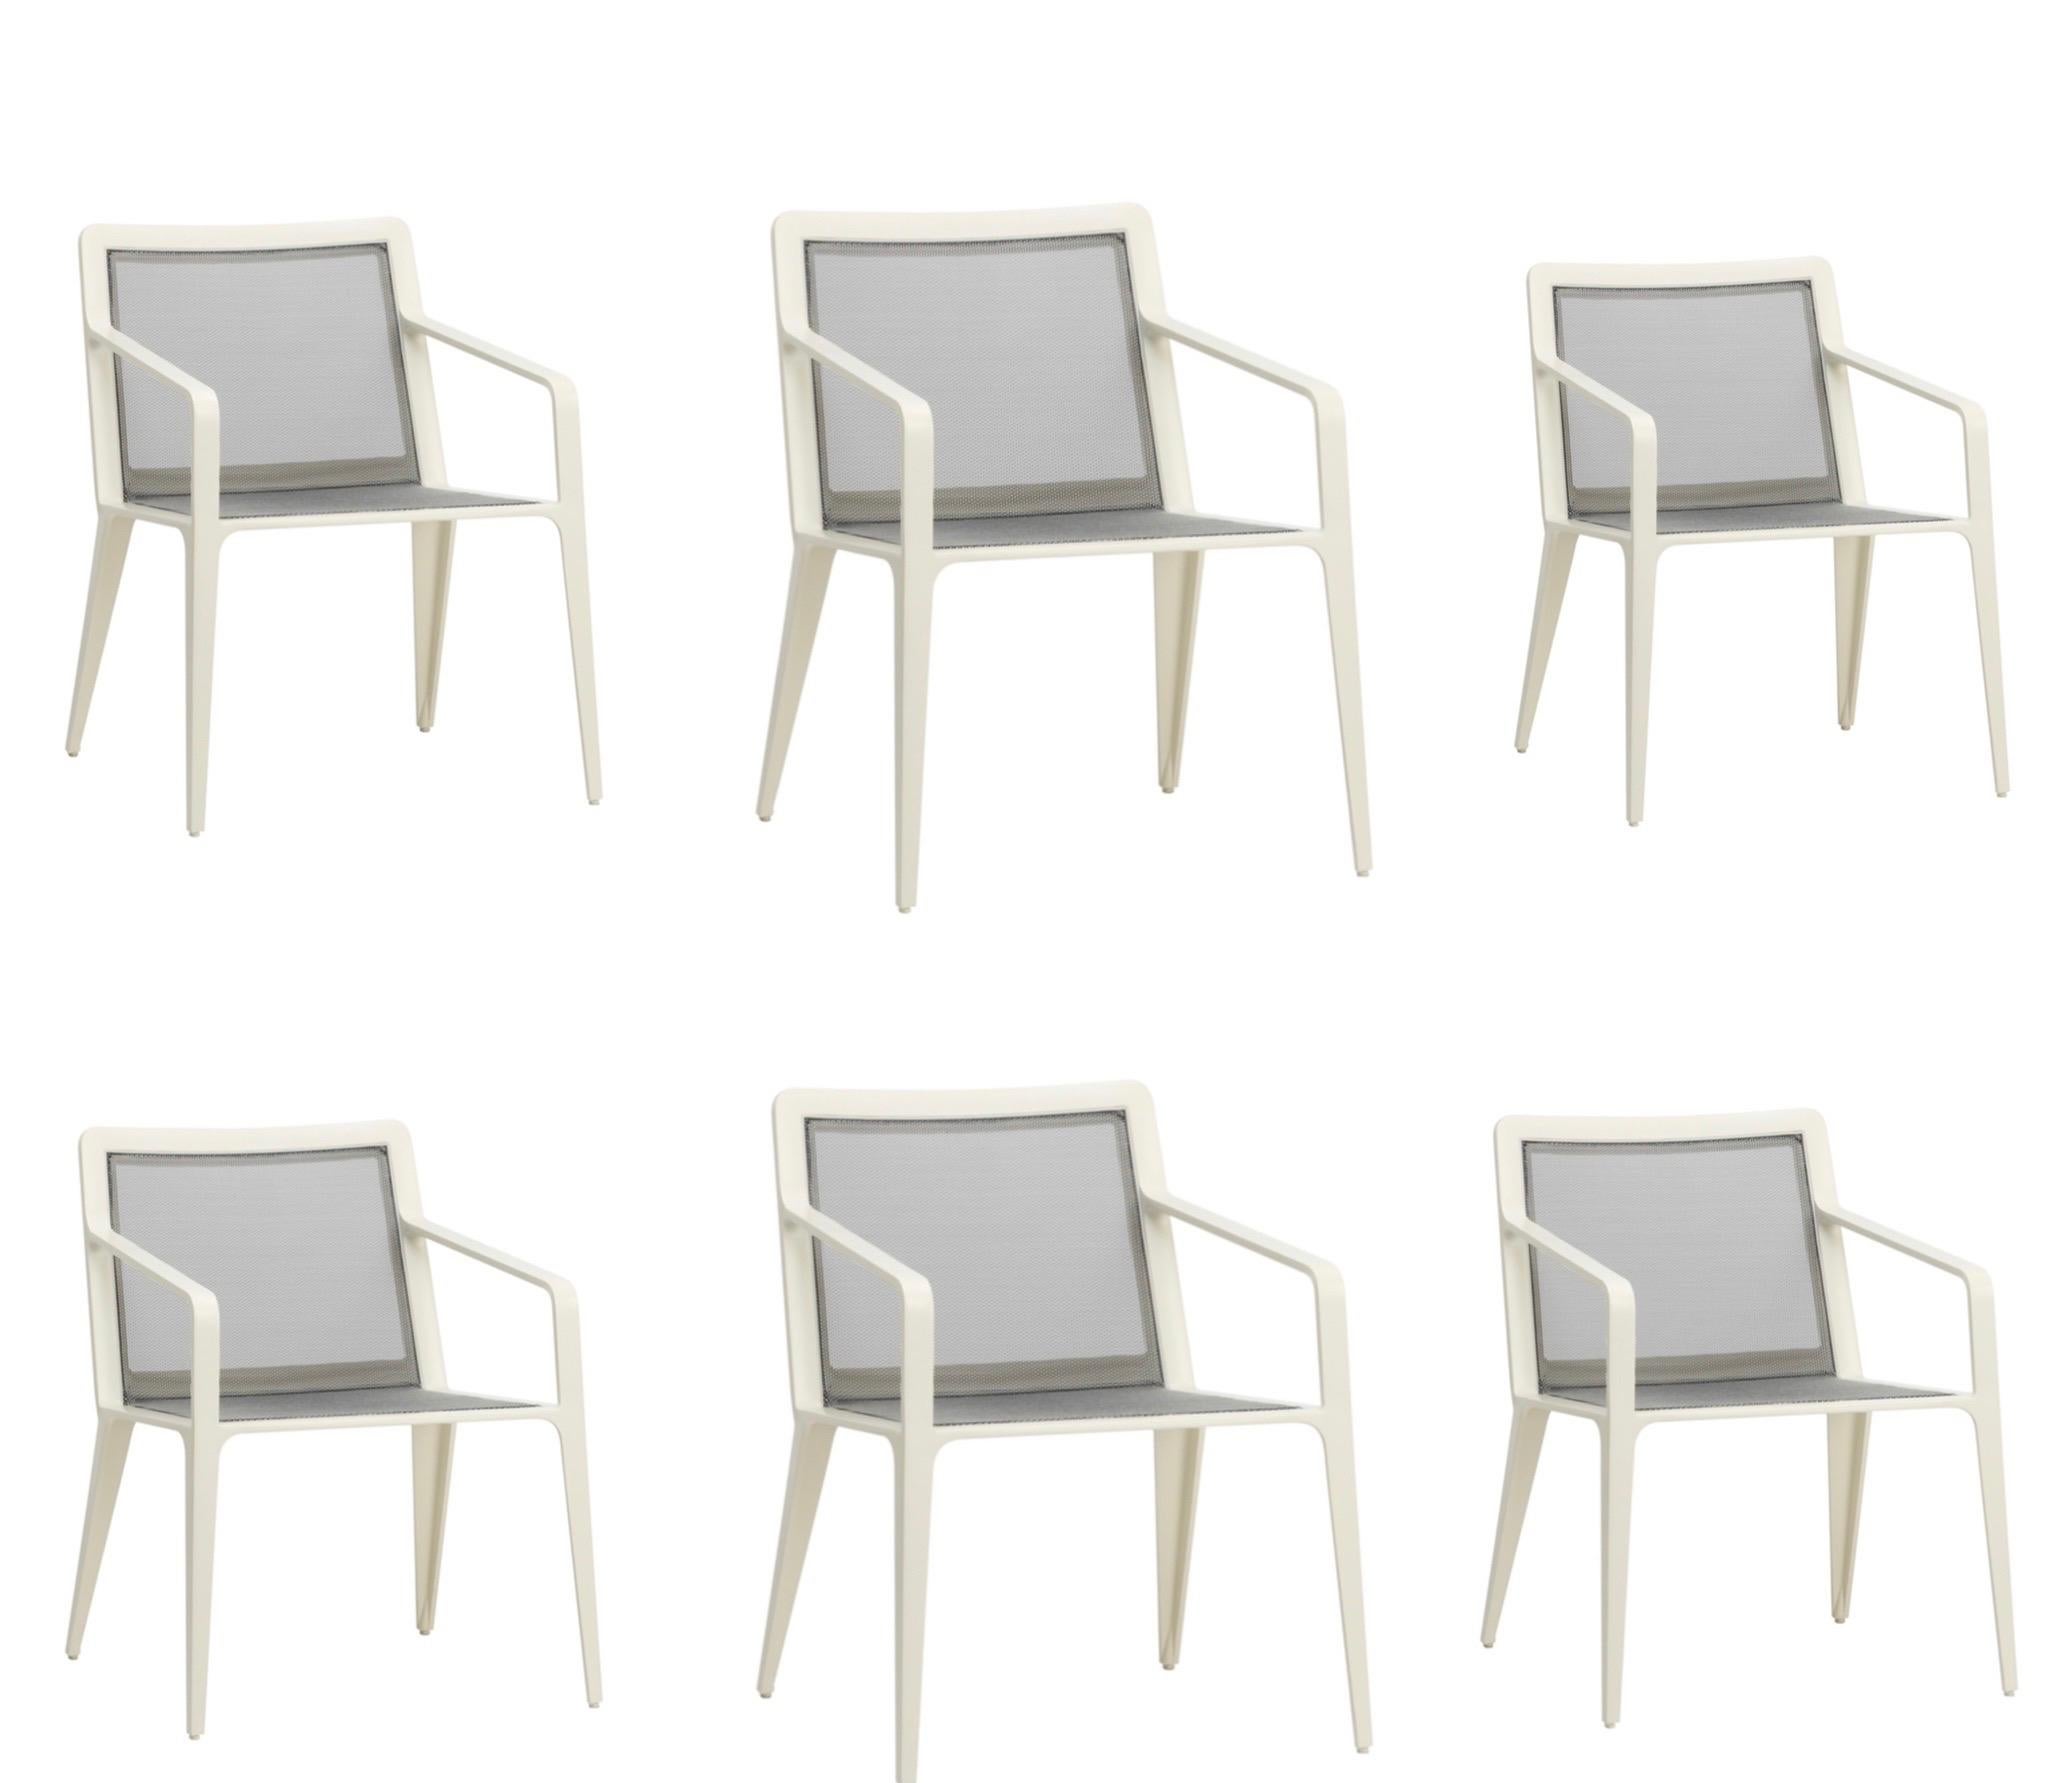 Brown Jordan still arm chair

Set of 6 crafted of strong, lightweight aluminum with a smooth, white powder-coated finish that stands up to the elements. Sculpted with softened edges and angles, Still, designed by Richard Frinier, instantly conveys